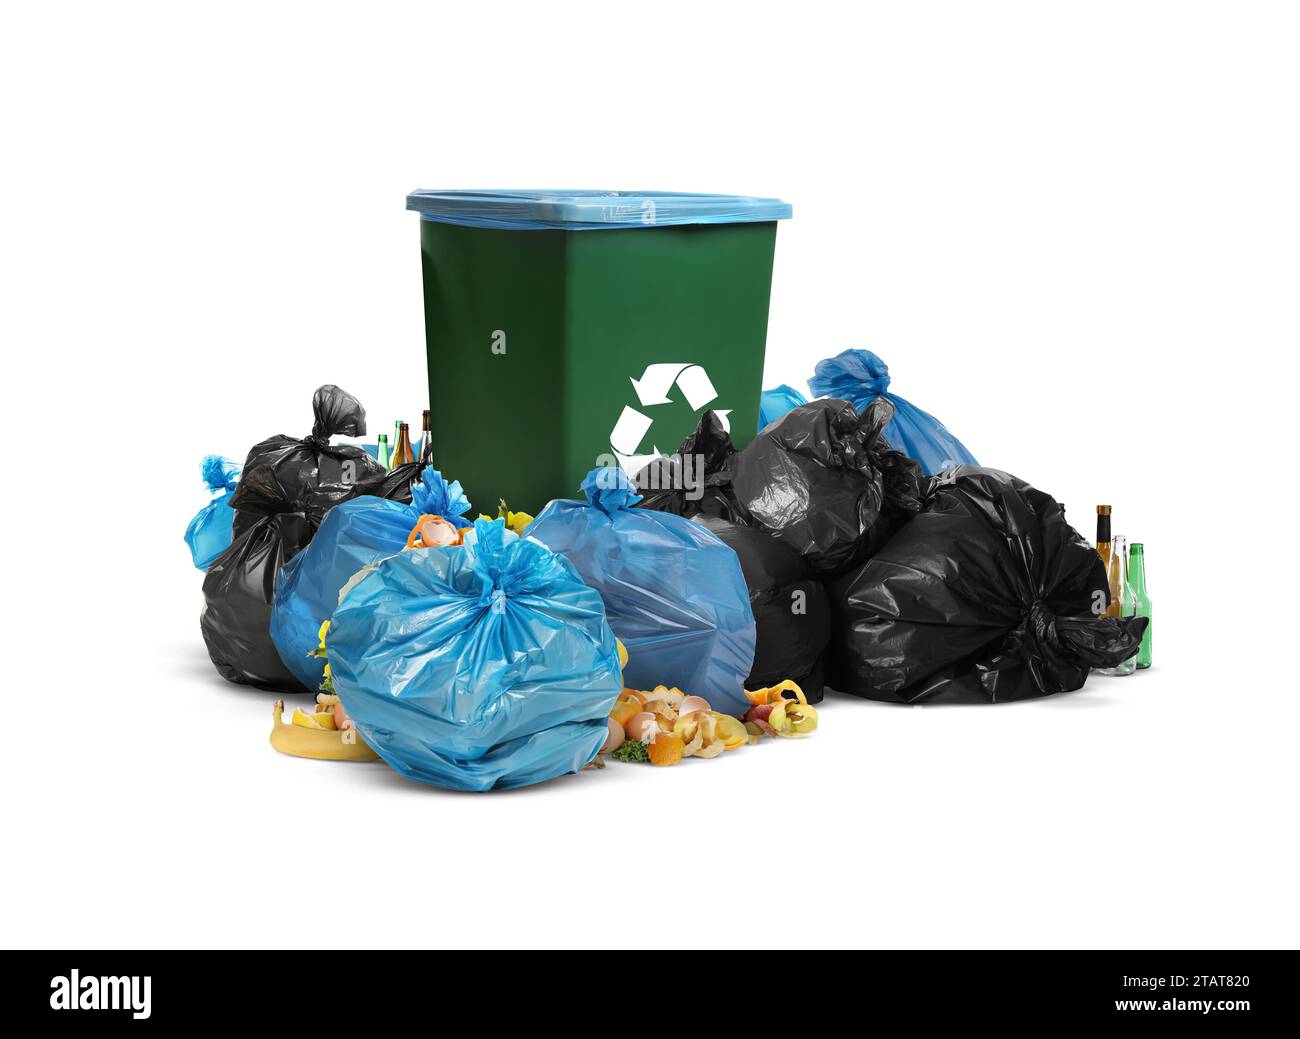 Waste bin, plastic bags and garbage on white background Stock Photo